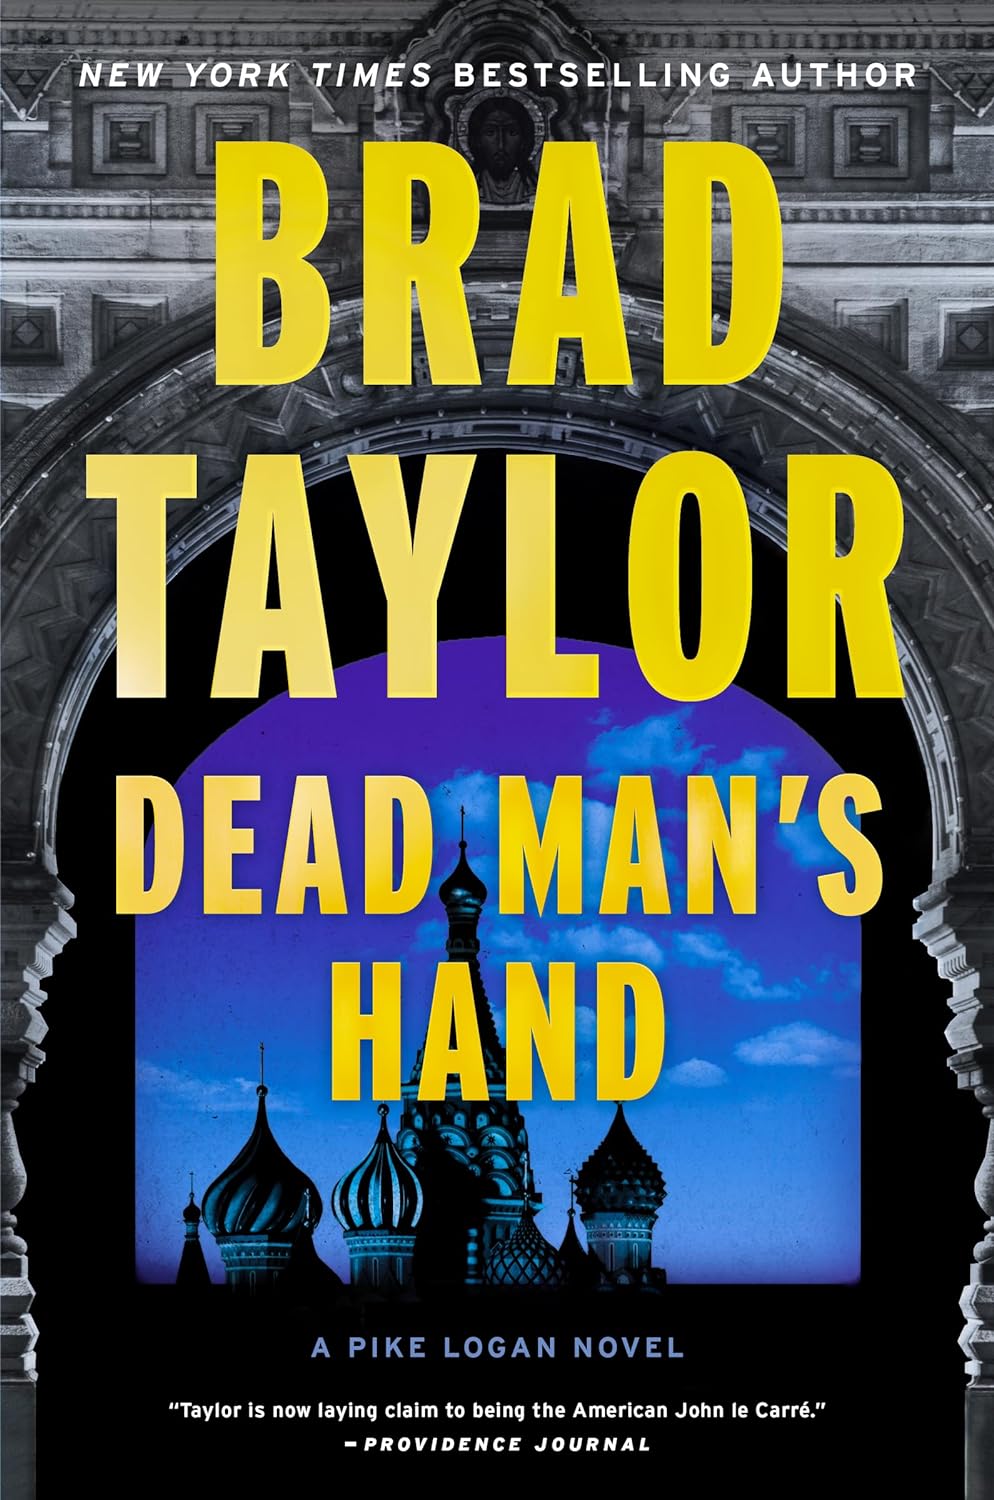 Image for "Dead Man's Hand"